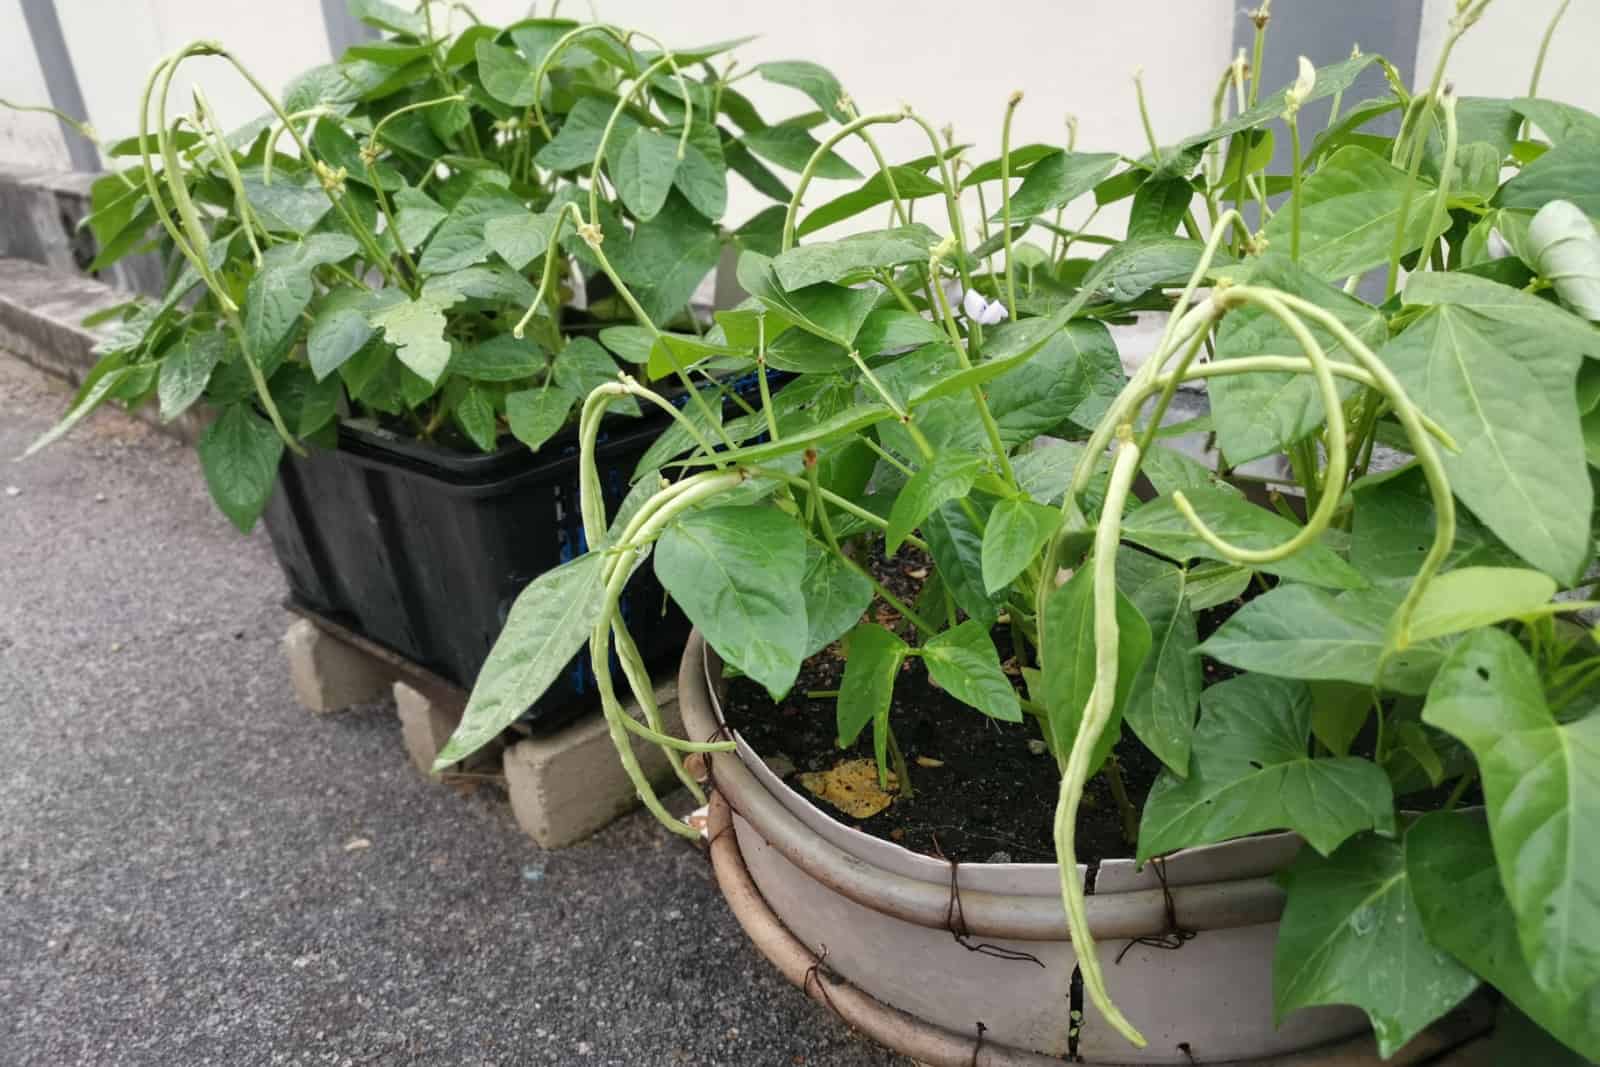 Yardlong bean plant growing on the pot.